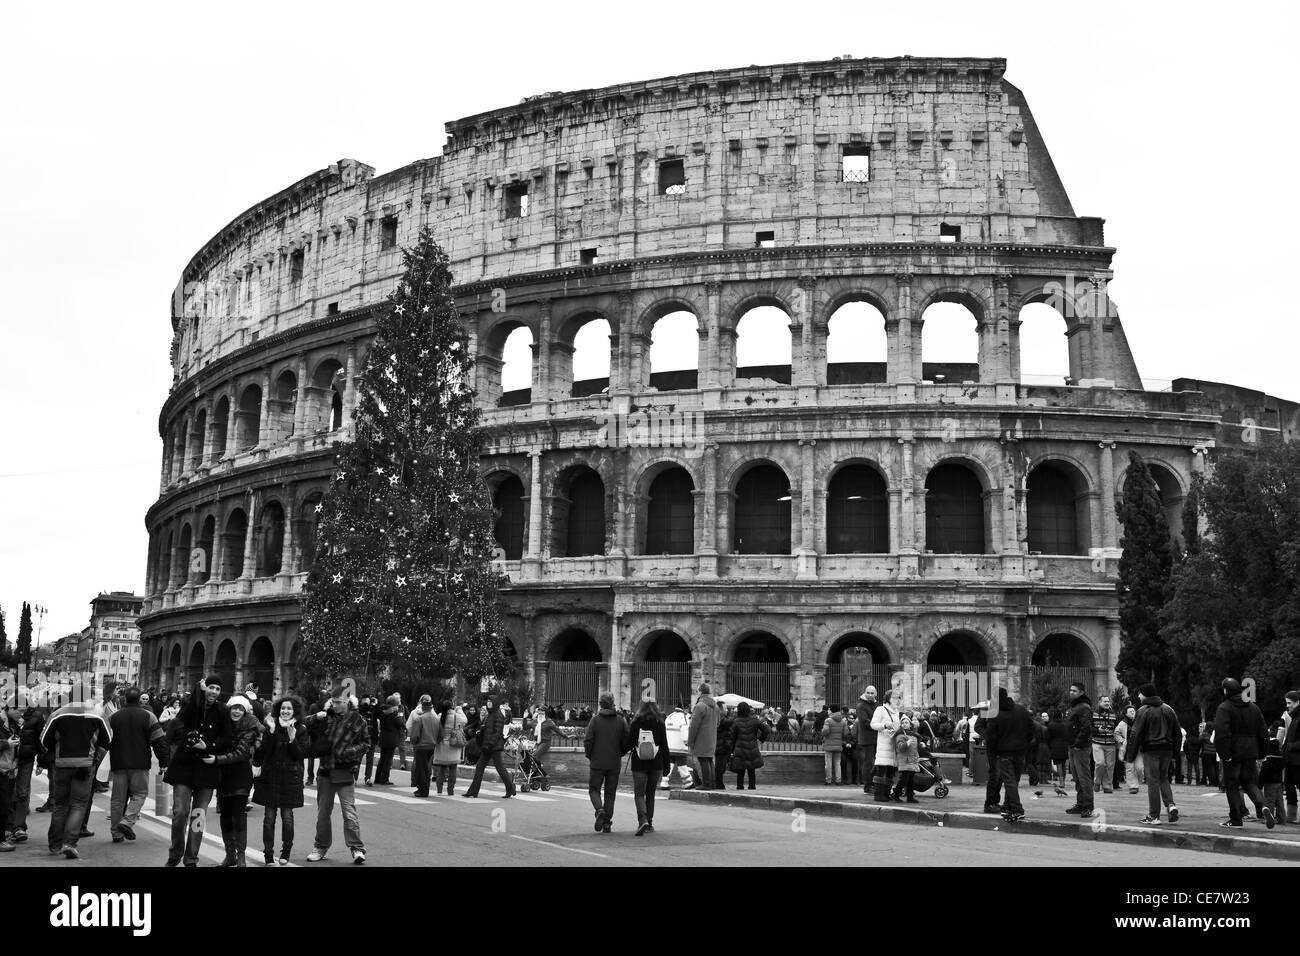 The Colosseum in Rome, Lazio, Italy with the Christmas season Christmas tree. Stock Photo